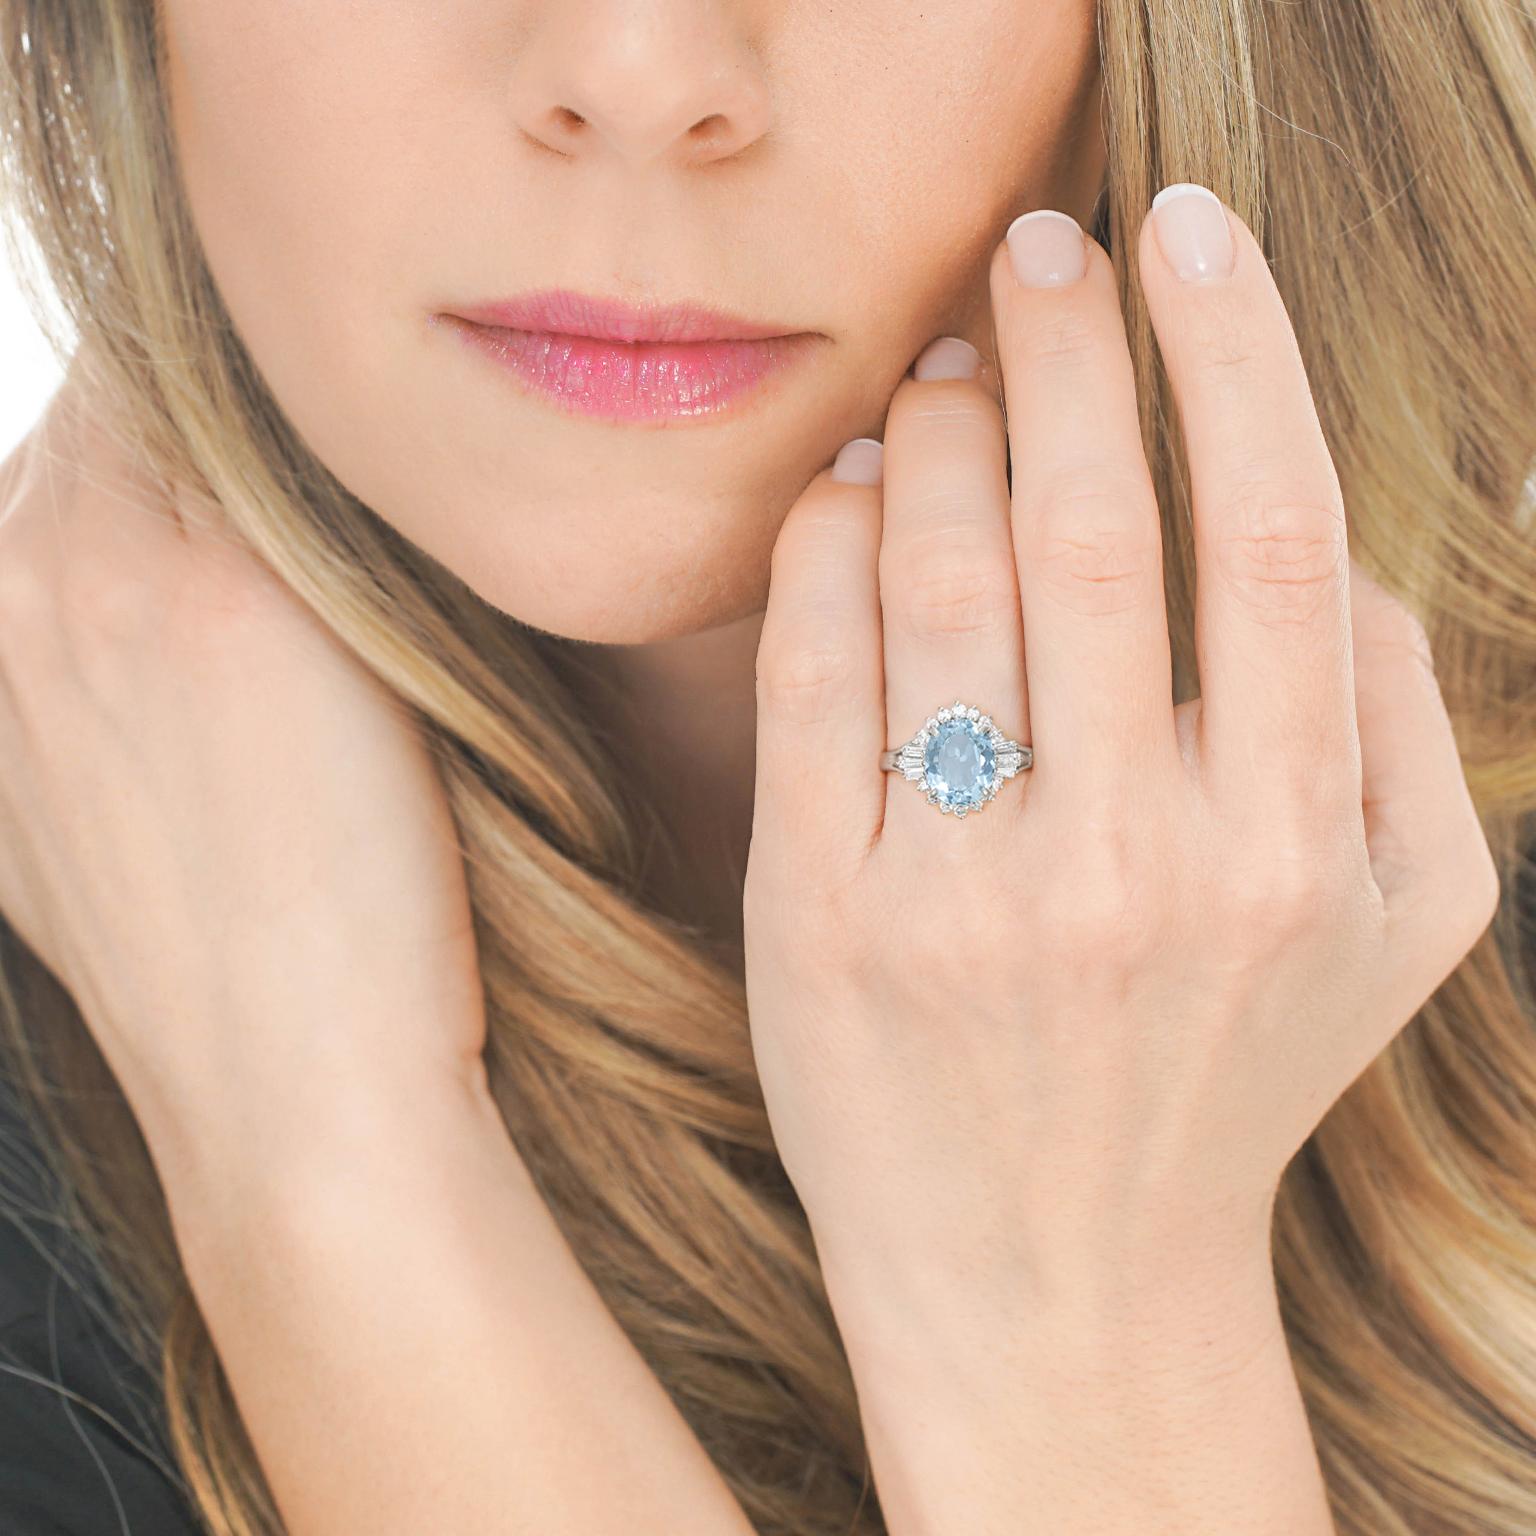 Circa 1960s, Platinum, American. Set with a gorgeous 4.57 carat vivid blue aquamarine accented by .45 carats of brilliant white diamonds (G color, SI1 clarity), this posh ring is vintage chic at its retro sixties best. Finely fashioned in platinum,